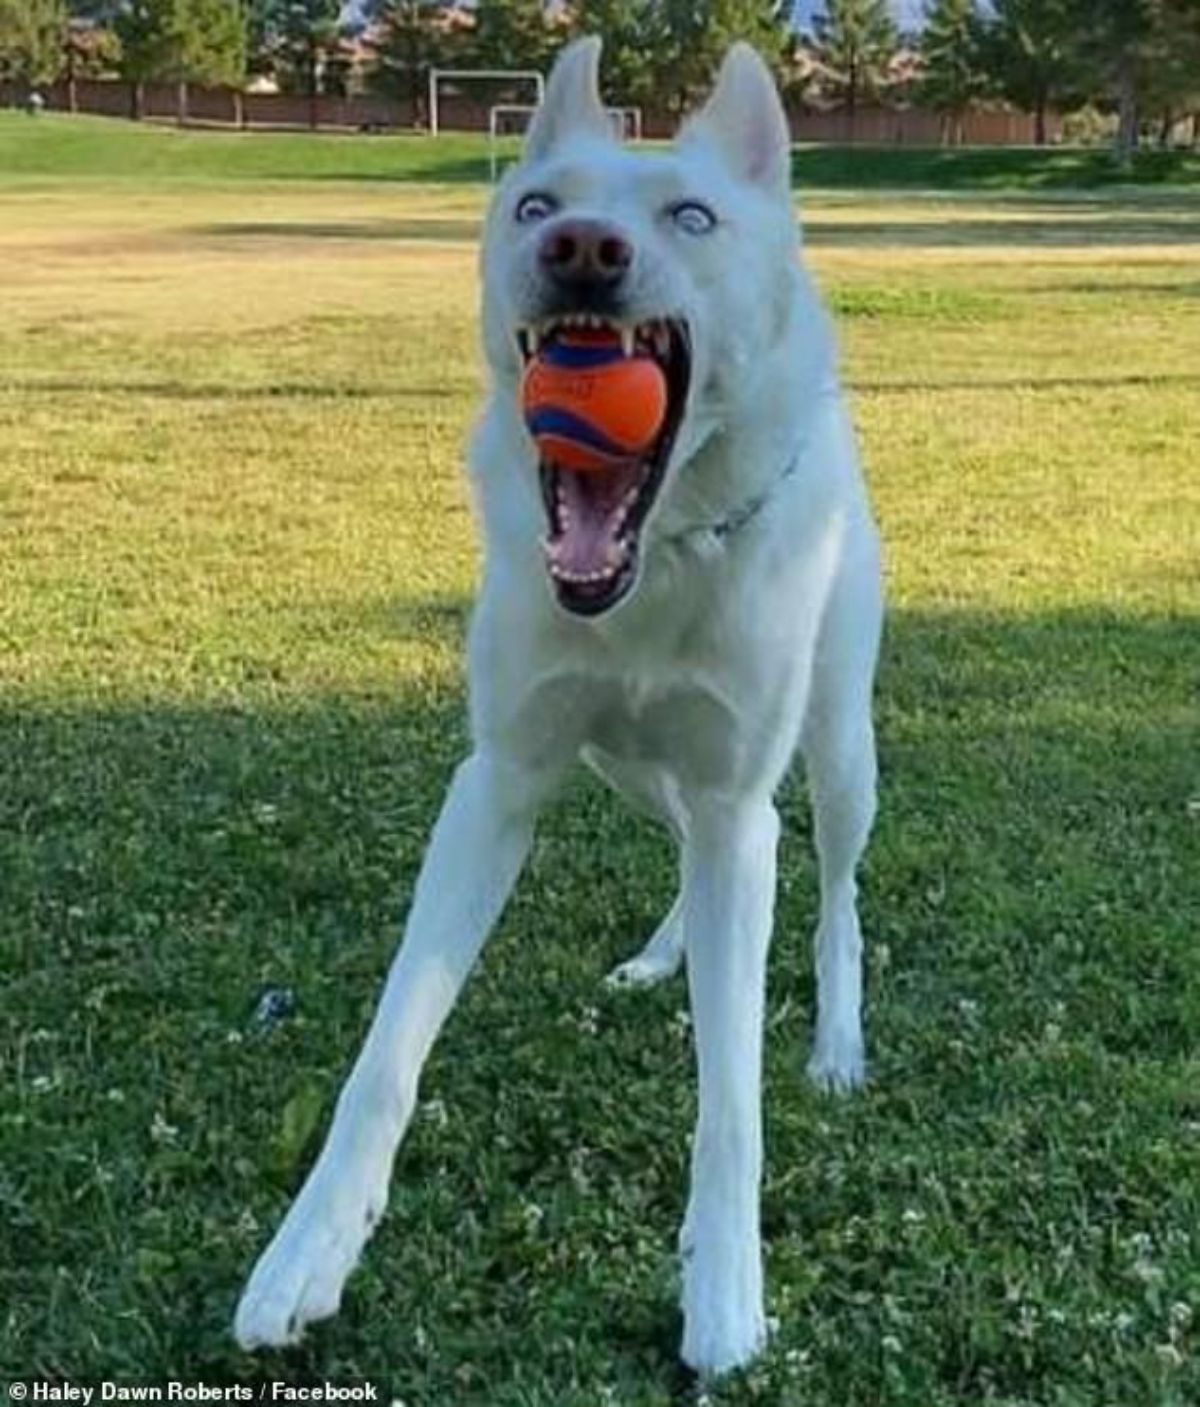 white dog running and holding an orange and blue ball in its mouth